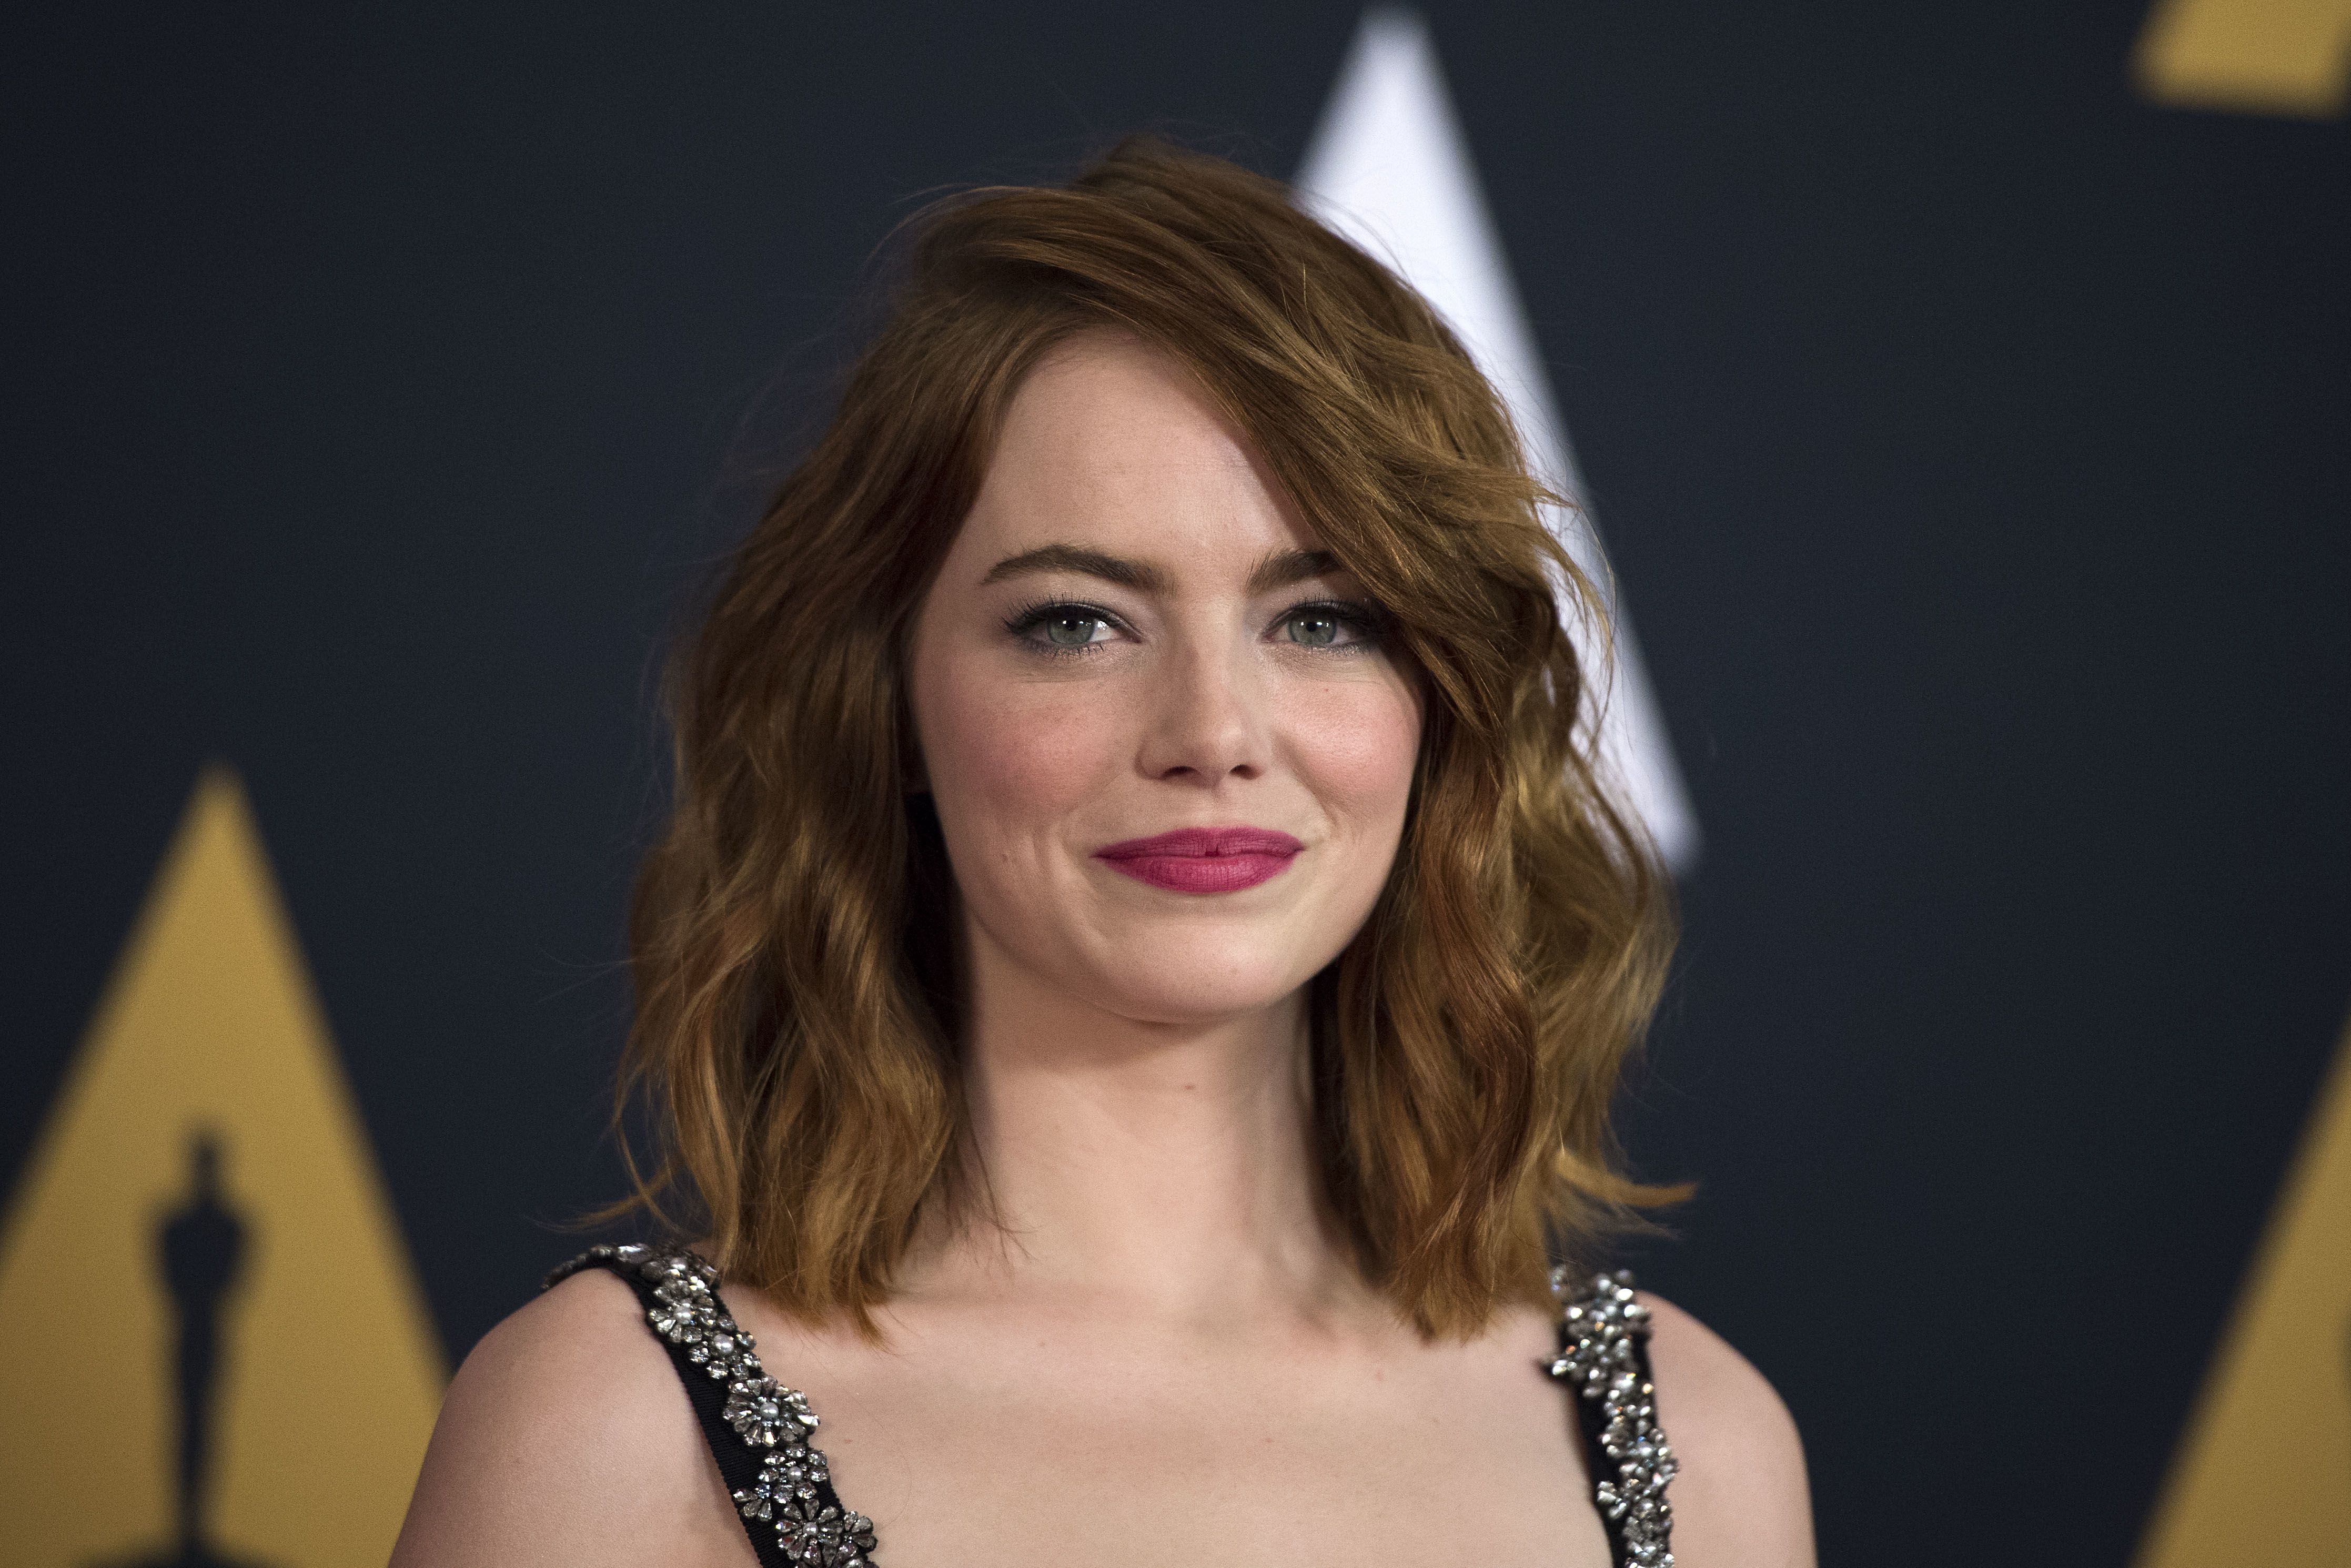 Emma Stone sees Trump parallels in Battle of the Sexes